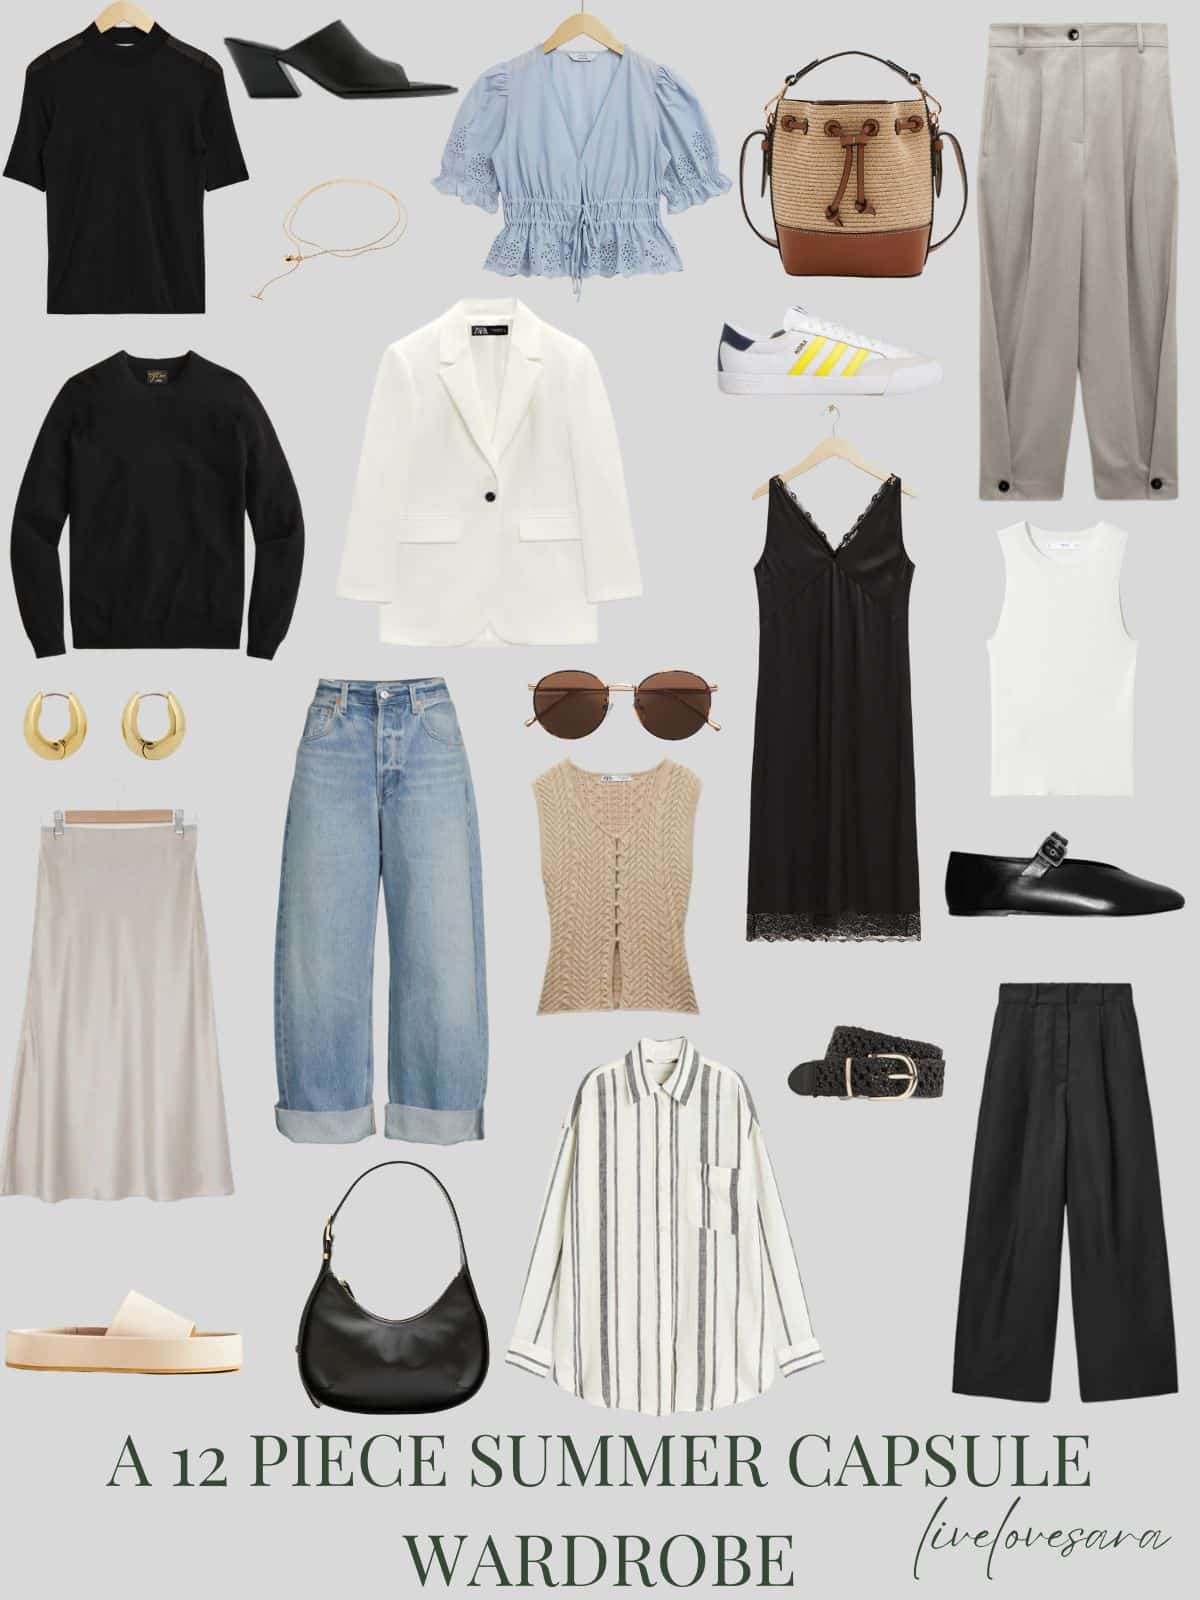 A white background with 12 clothing items plus shoes and accessories for a minimalist summer capsule wardrobe.